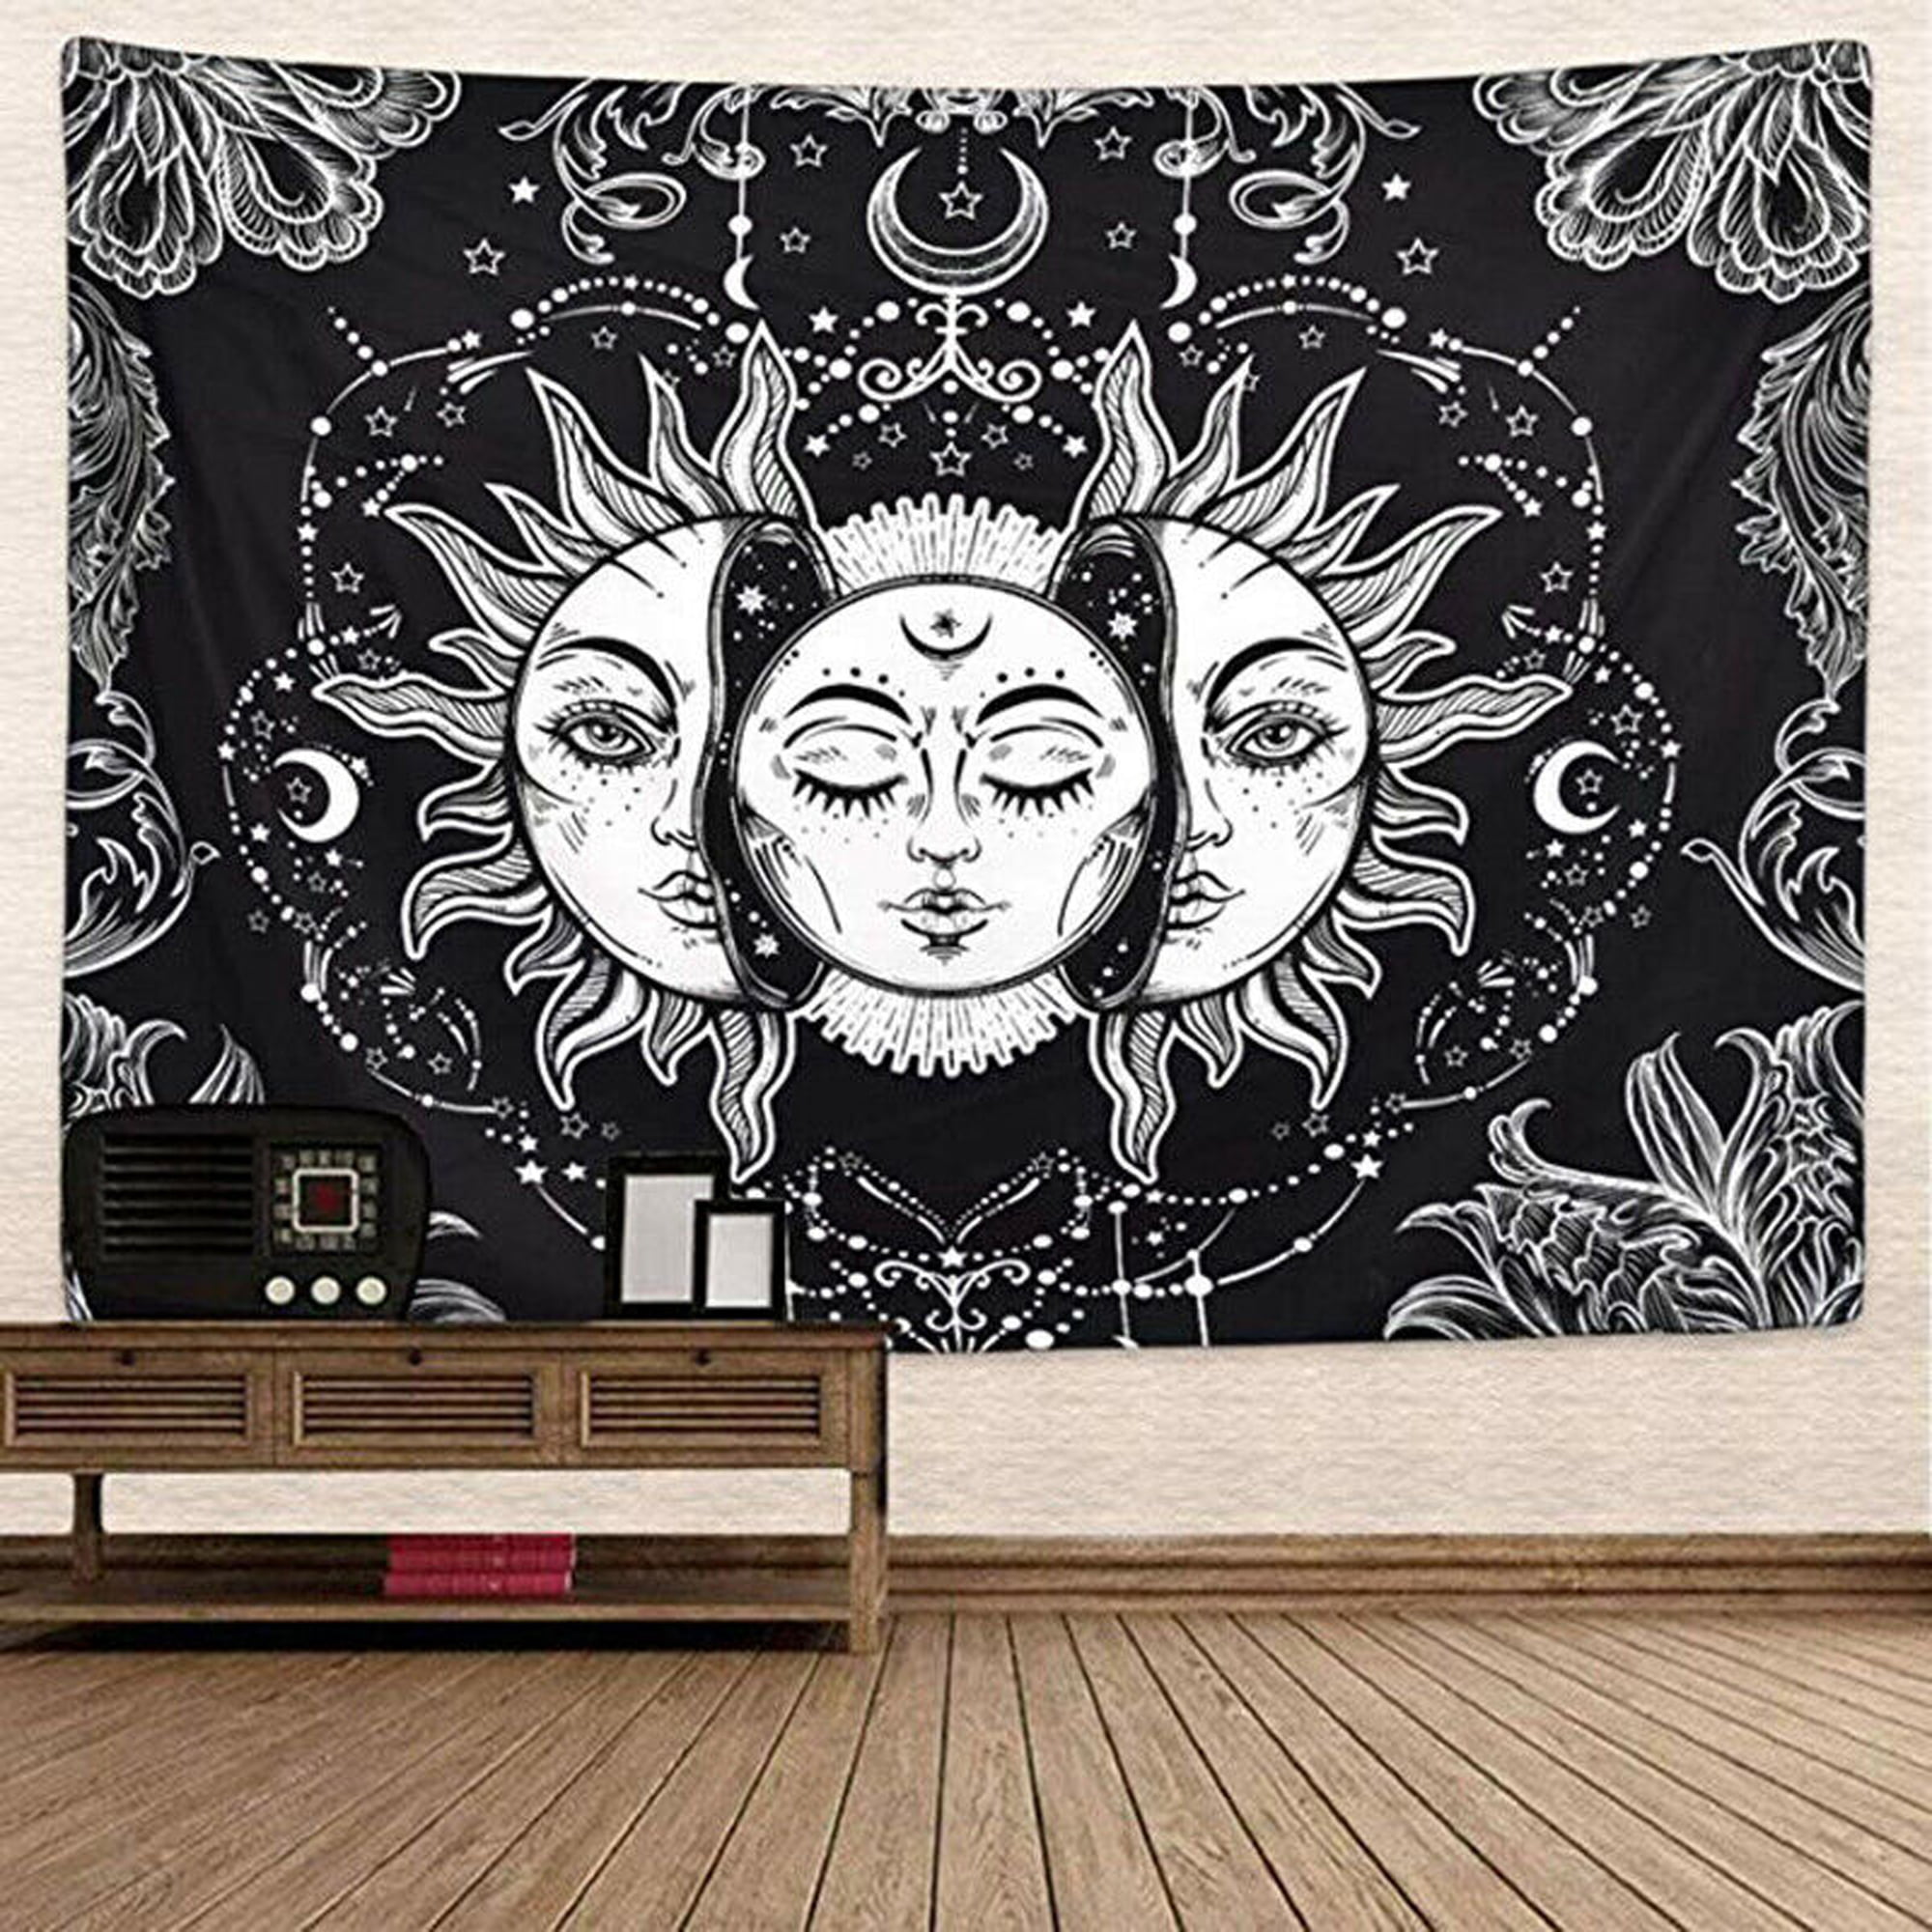 Fantasy Forest Wall Hanging Tapestry Blankets Psychedelic-Bedspread Art Decor UK